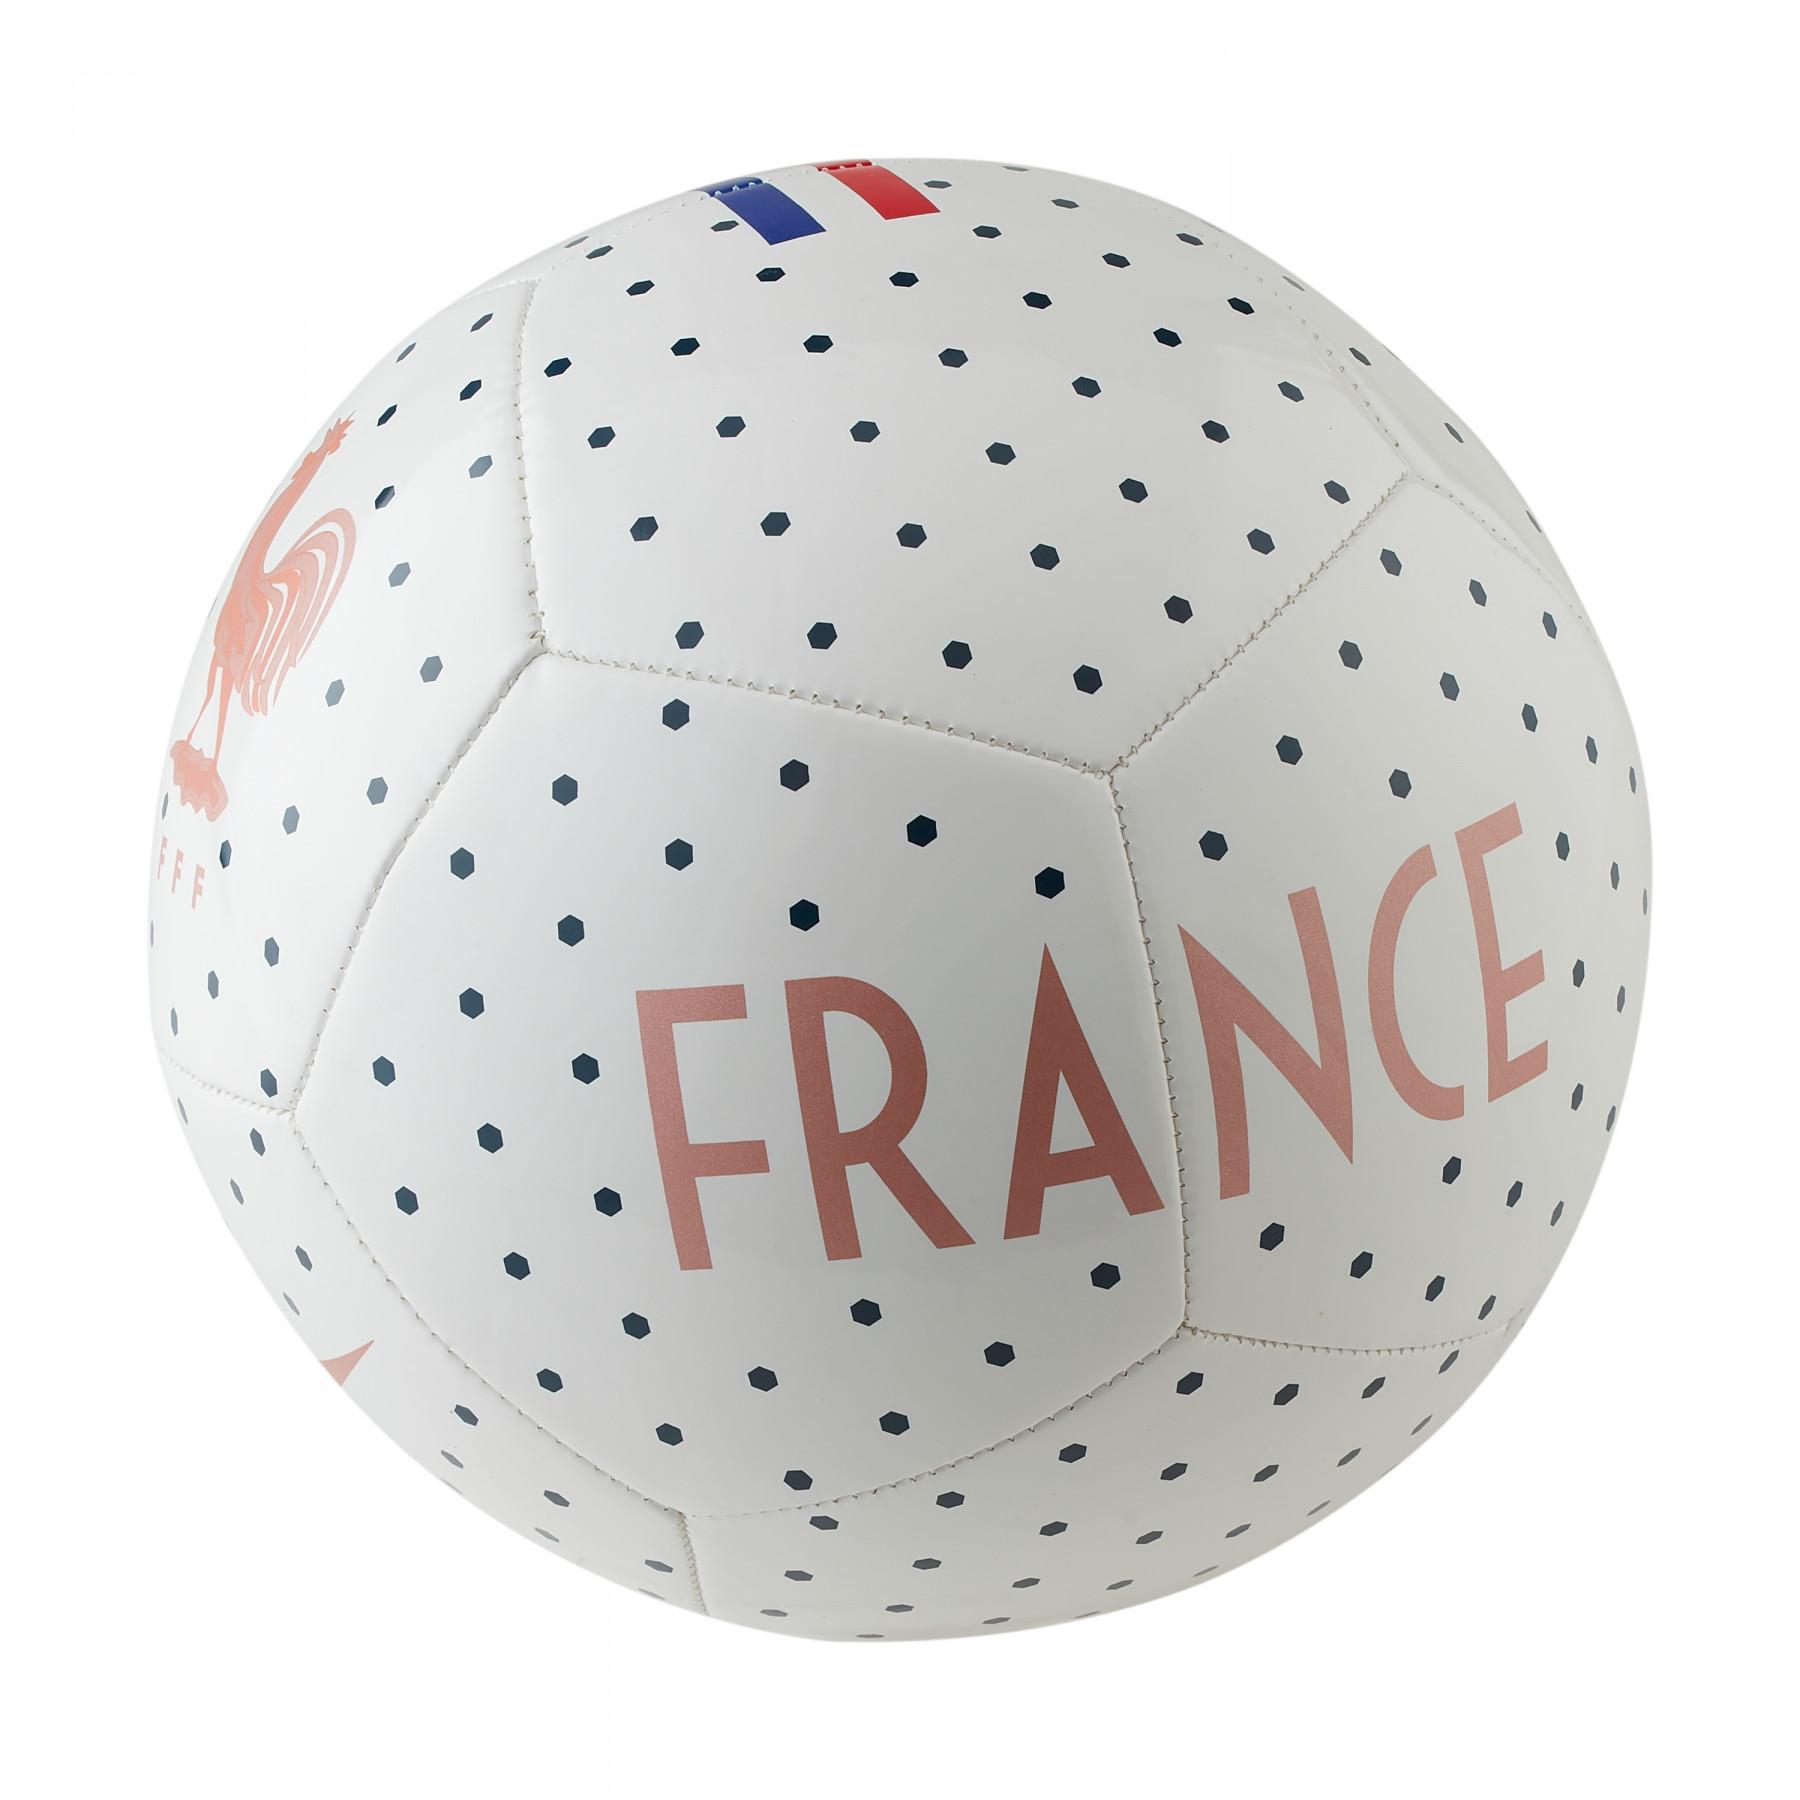 Palloncino France Pitch